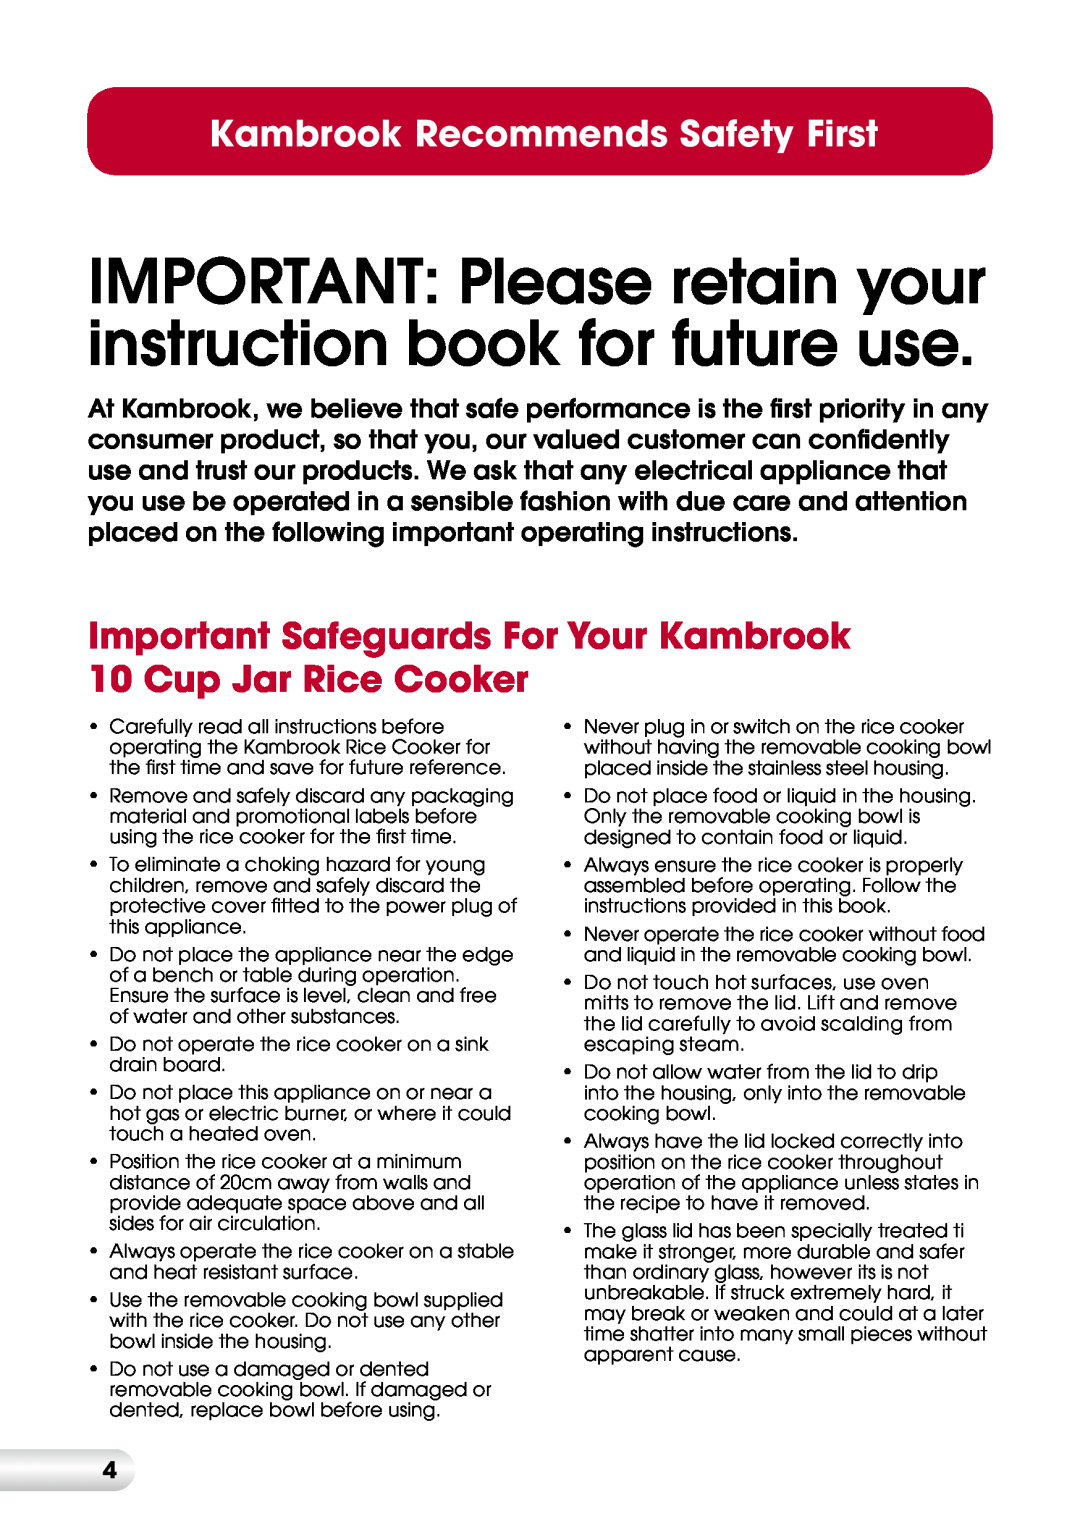 Kambrook KRC400 manual Kambrook Recommends Safety First 